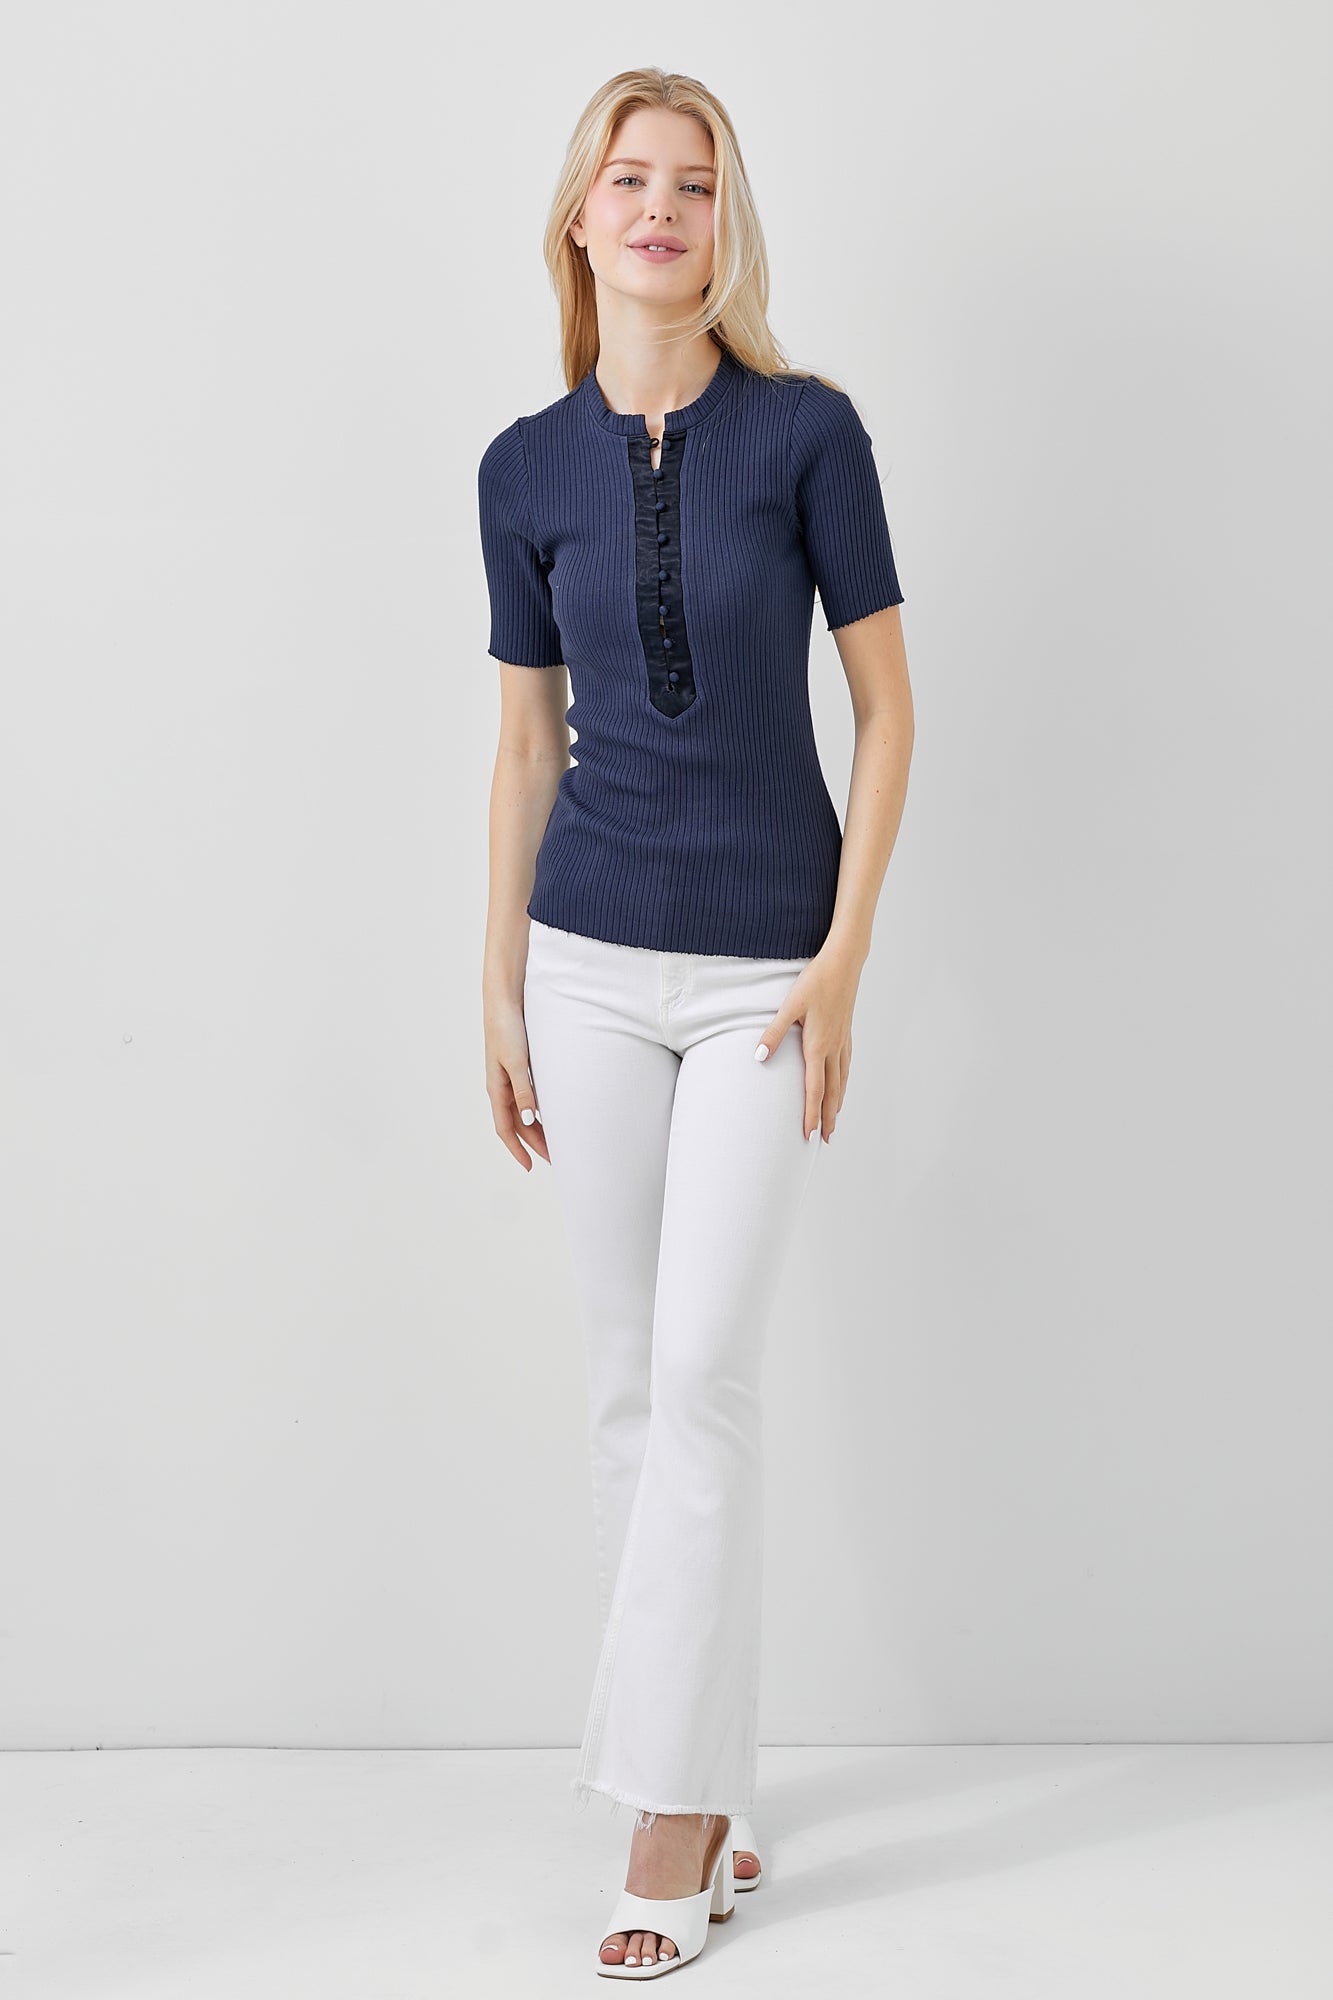 Maven West S/S Rib Button Top-Navy